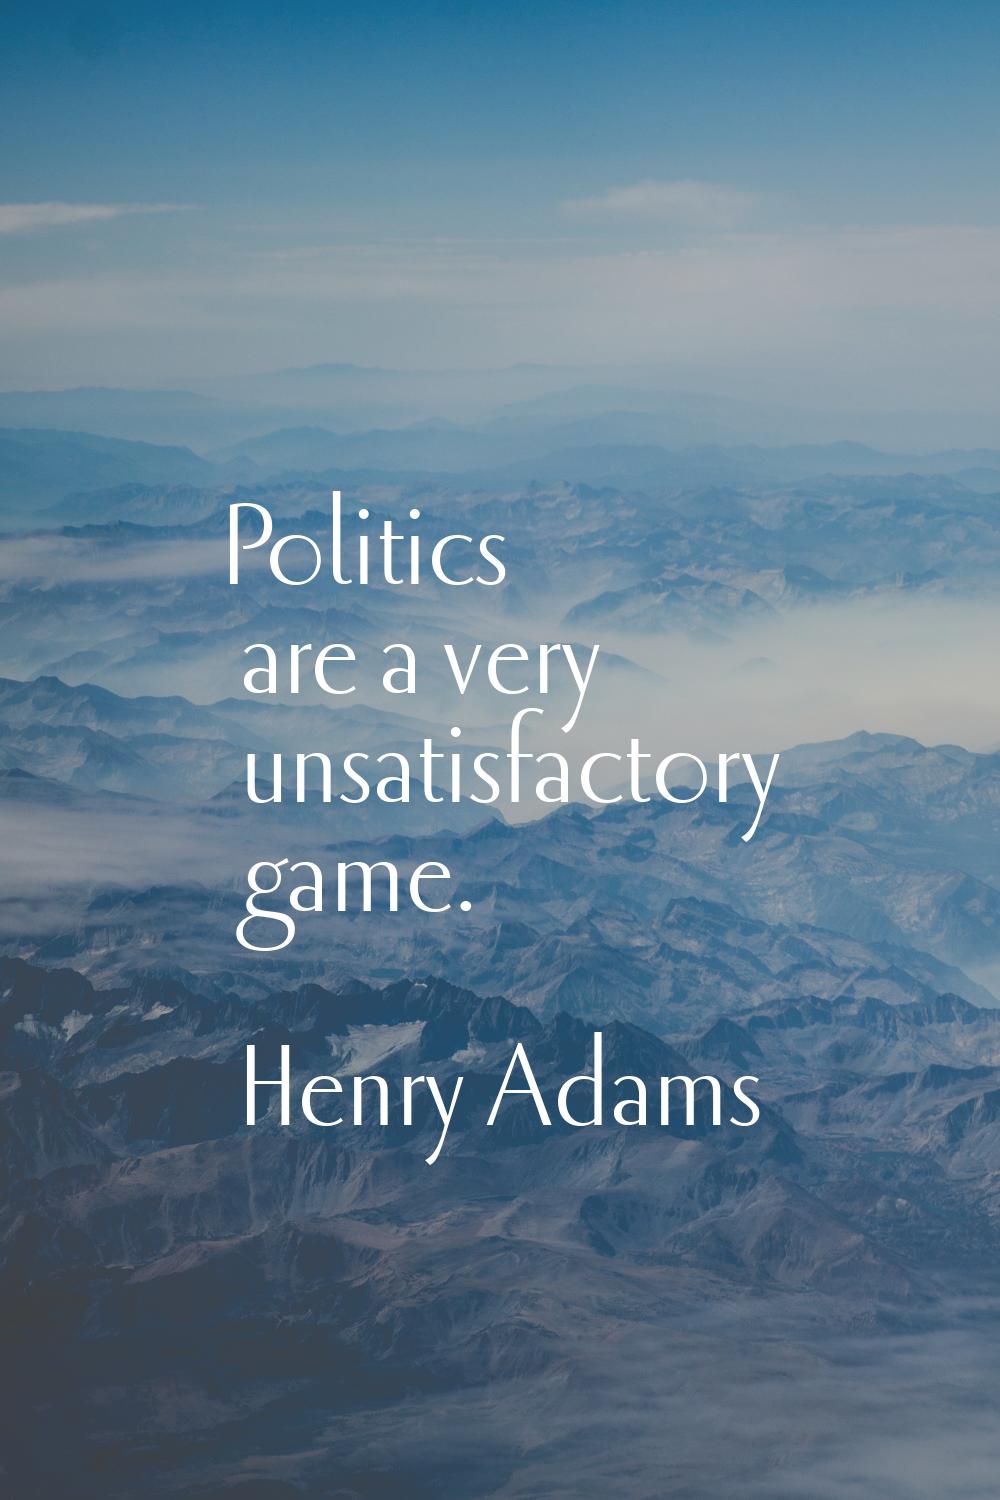 Politics are a very unsatisfactory game.